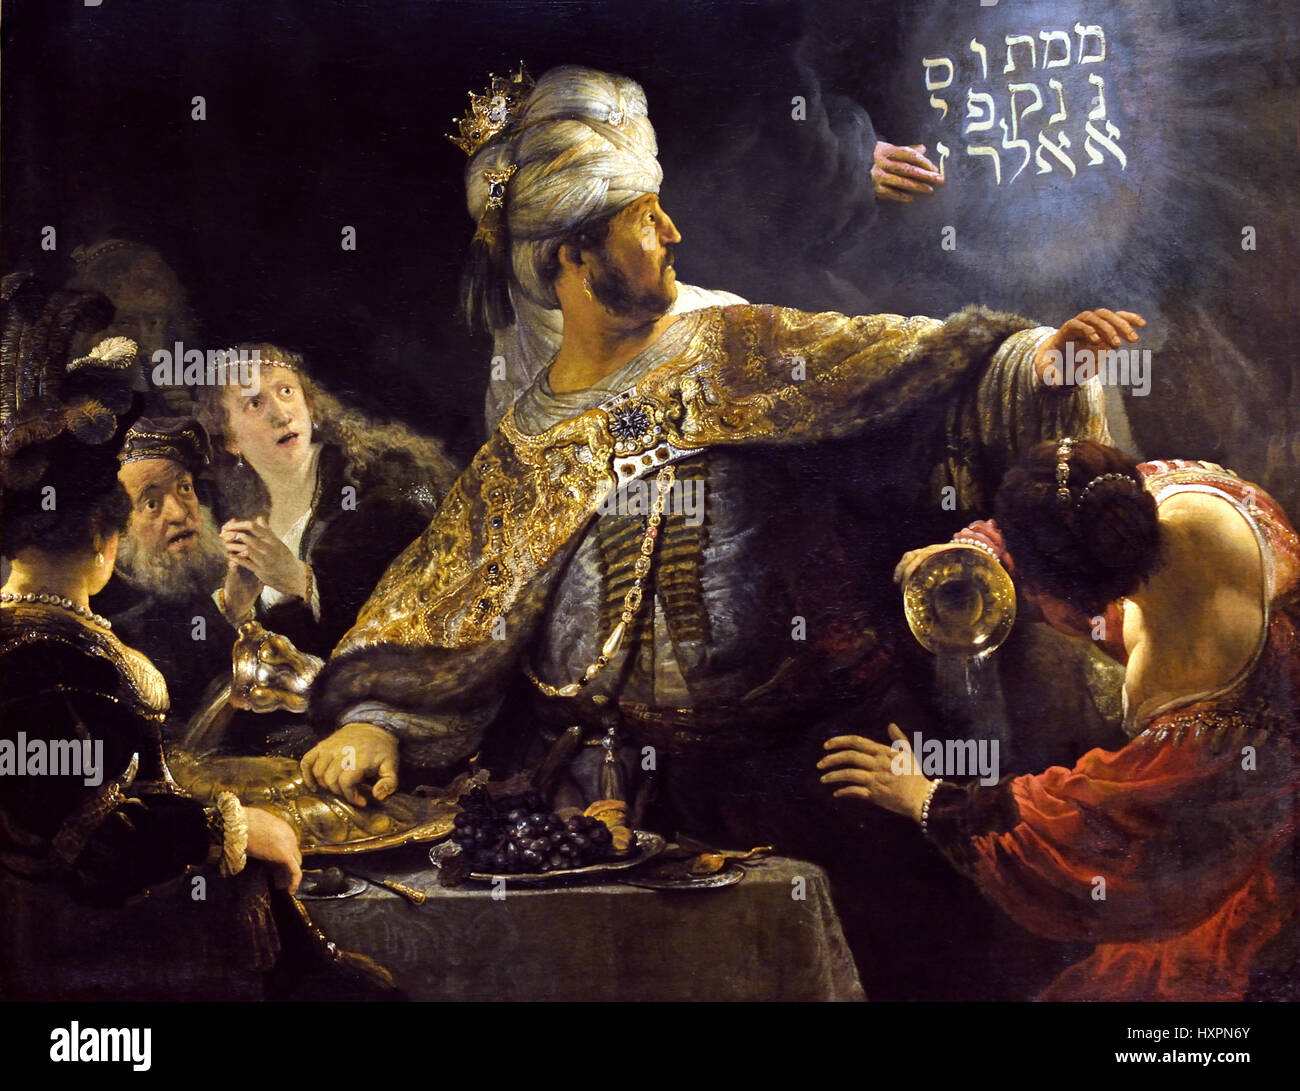 Belshazzar's Feast about 1636-8 Rembrandt Harmenszoon van Rijn1606–1669 Dutch The Netherlands (  According to the Book of Daniel, Belshazzar holds a last great feast at which he sees a hand writing on a wall with the Aramaic words mene, mene, tekel, upharsin, which Daniel interprets as a judgment from God foretelling the fall of Babylon. Stock Photo